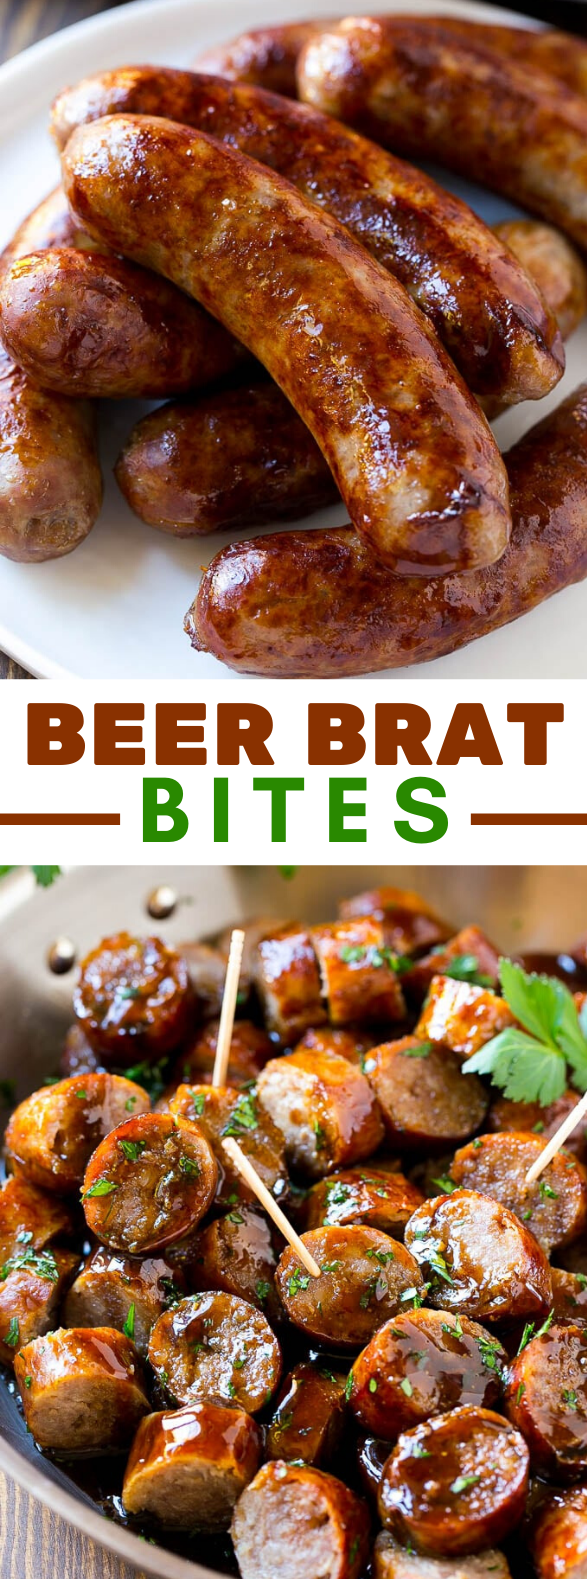 BEER BRAT BITES #appetizers #holidayparty